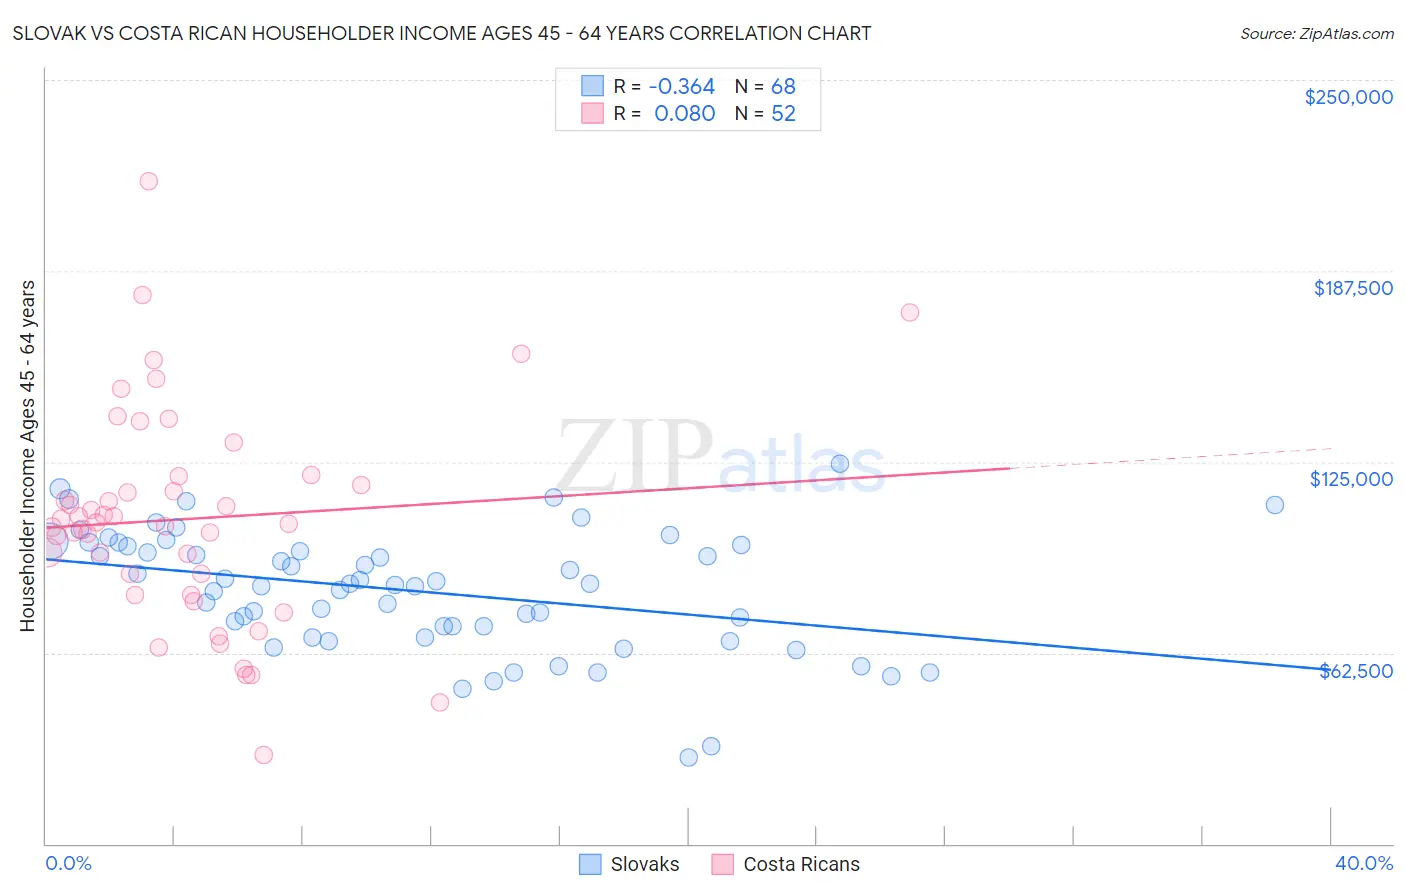 Slovak vs Costa Rican Householder Income Ages 45 - 64 years